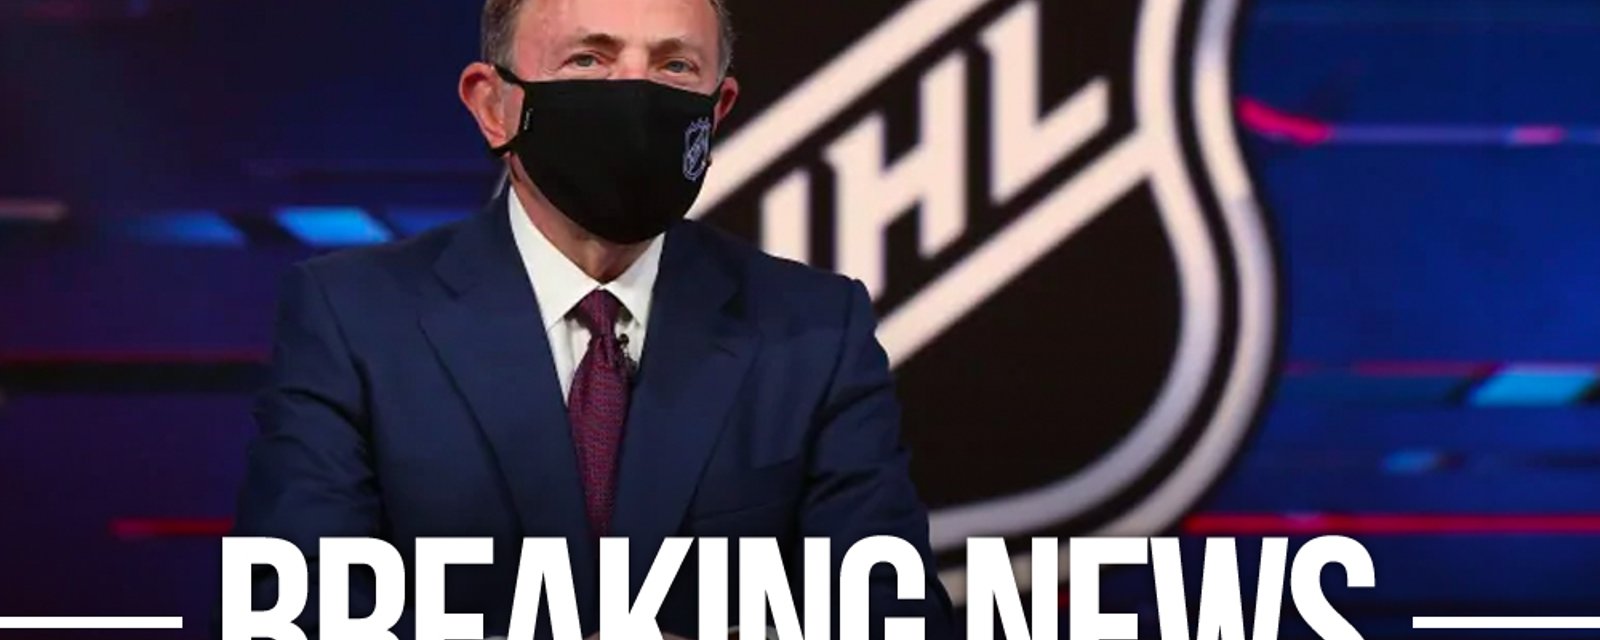 Bettman releases full list of changes and safety measures to be implemented immediately